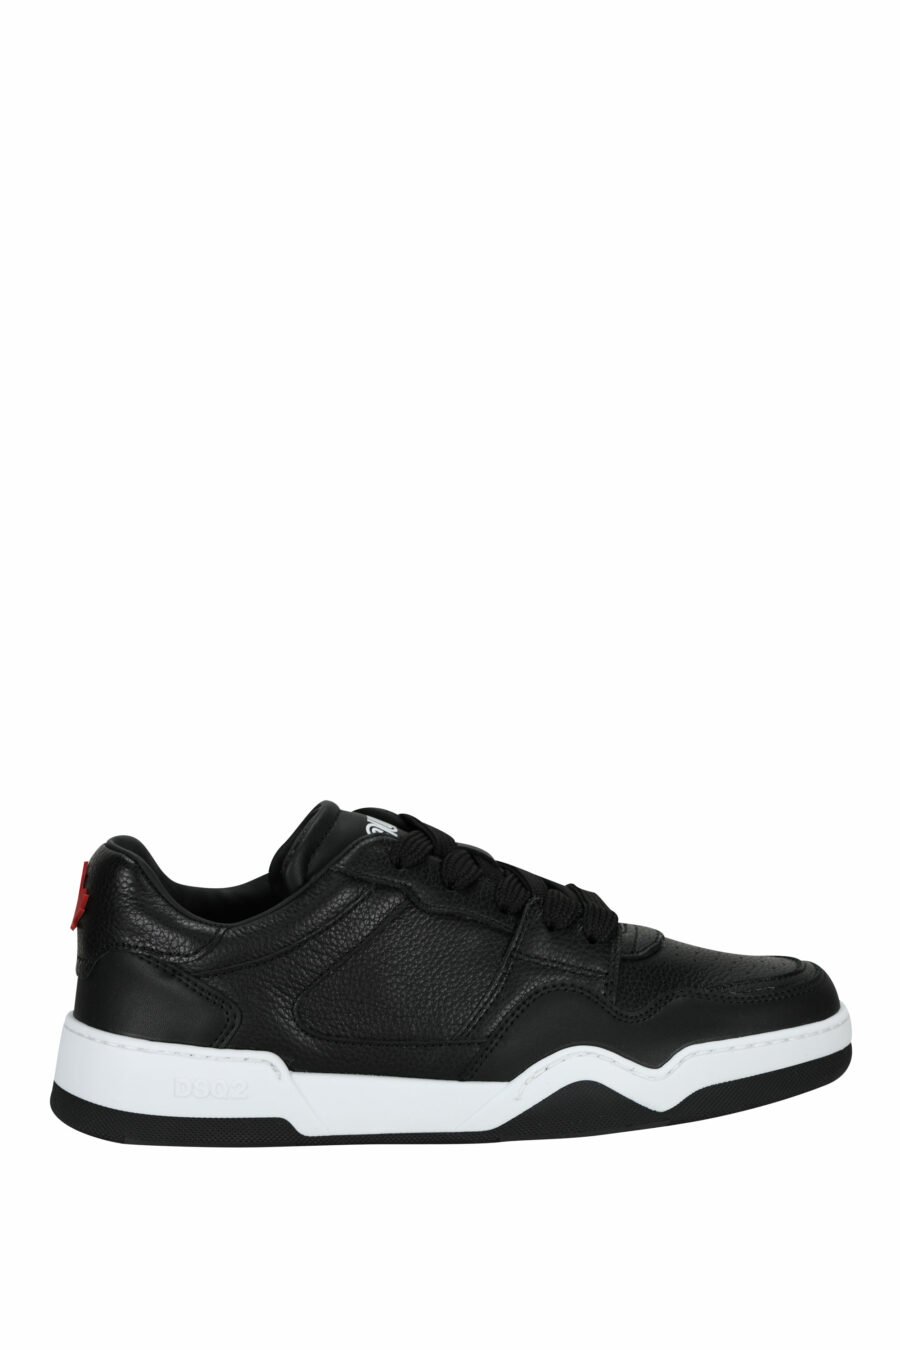 Black "spyker" trainers with two-tone sole - 8055777320327